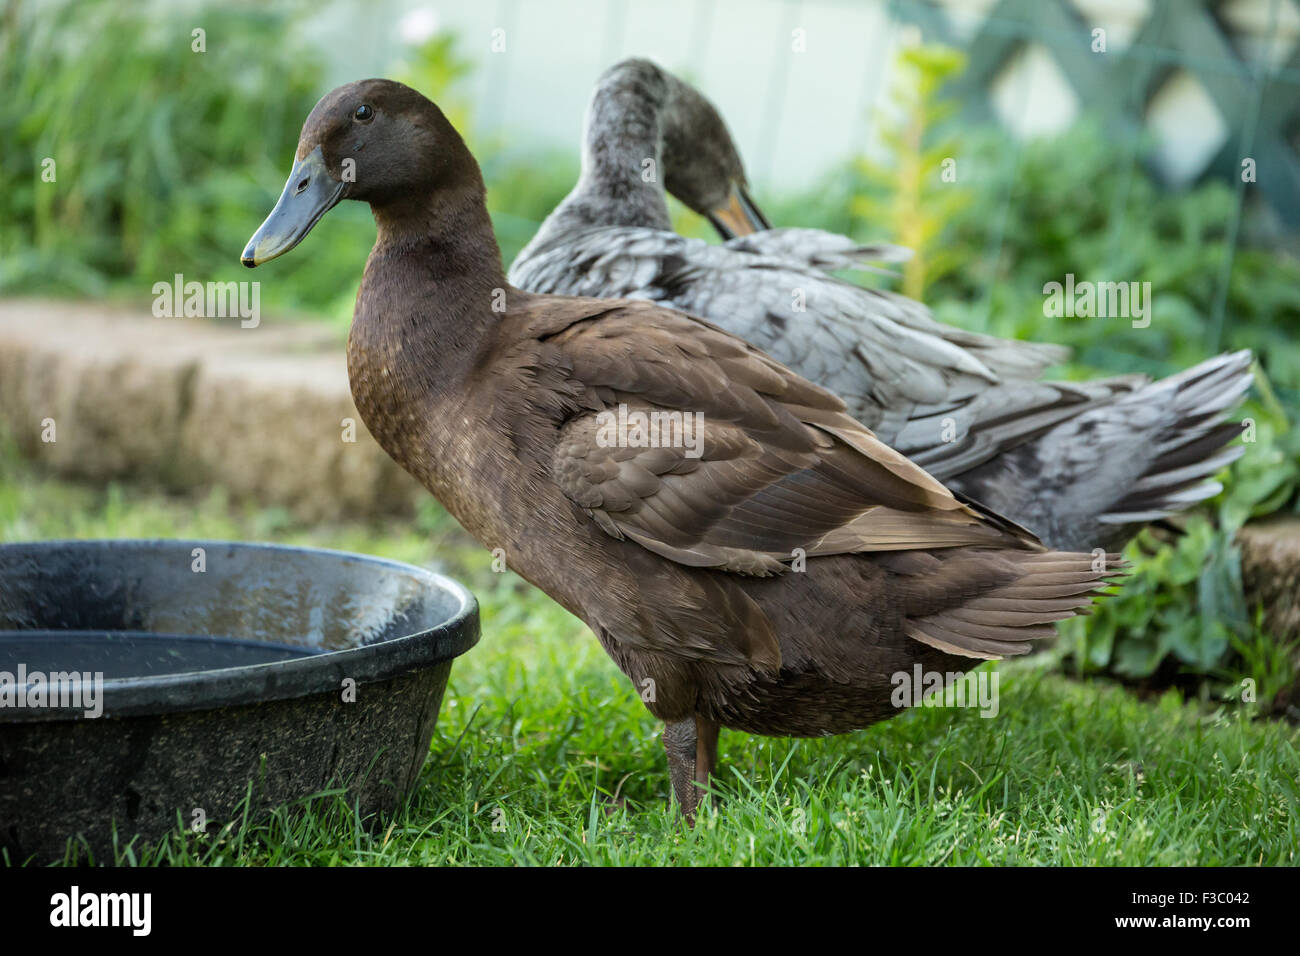 Chocolate and blue Indian Runner ducks (Anas platyrhynchos domesticus) preening.  They are an unusual breed of domestic duck. Stock Photo